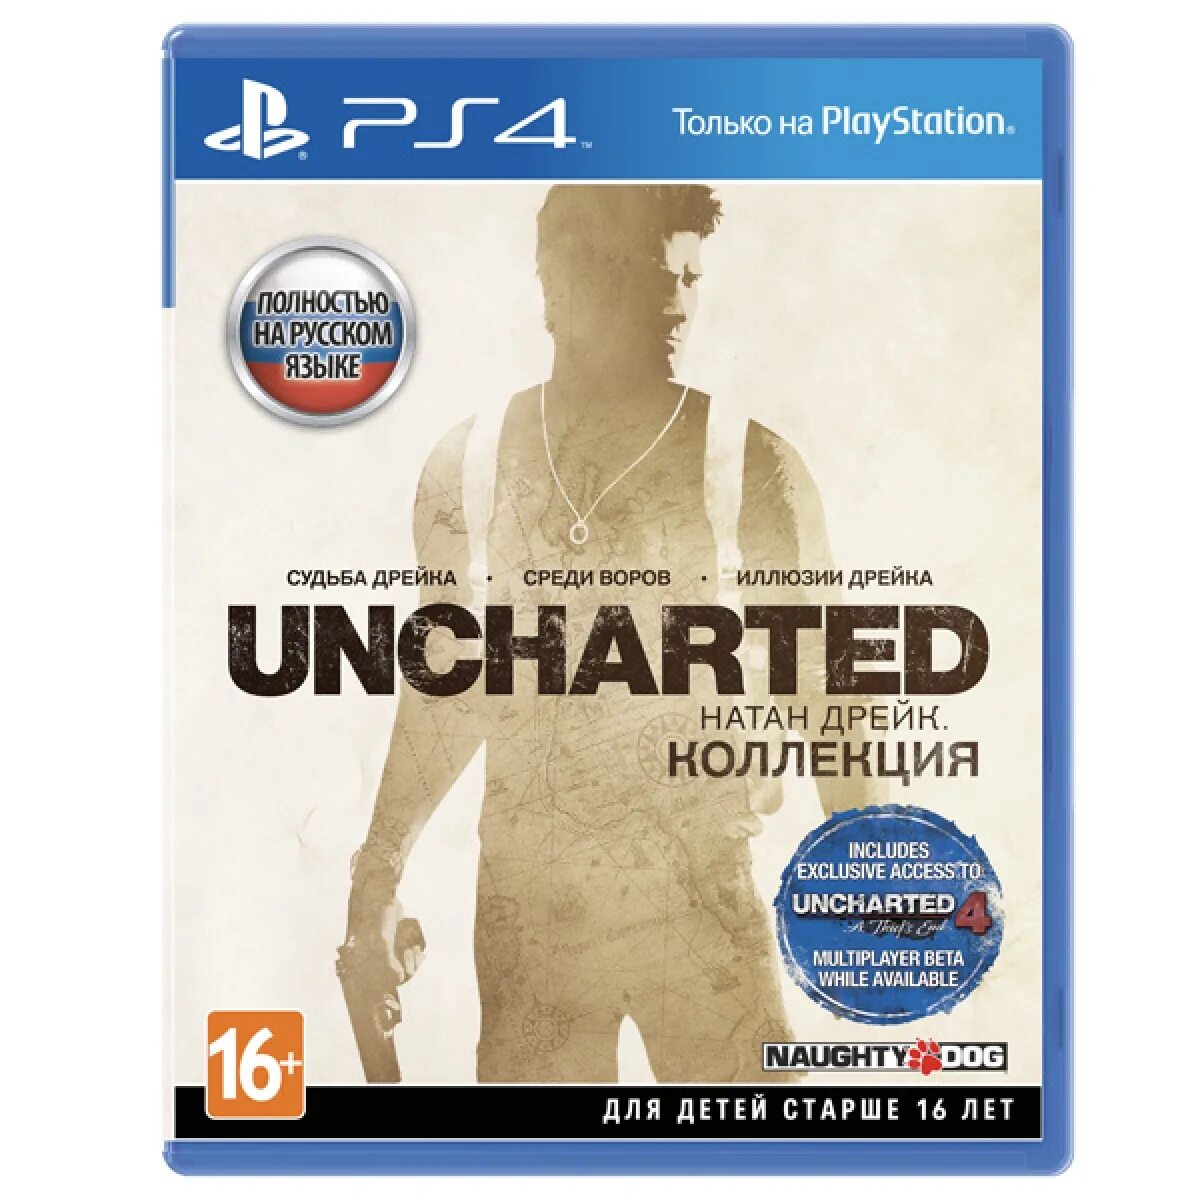 Ps4 коллекция. Uncharted collection ps4.